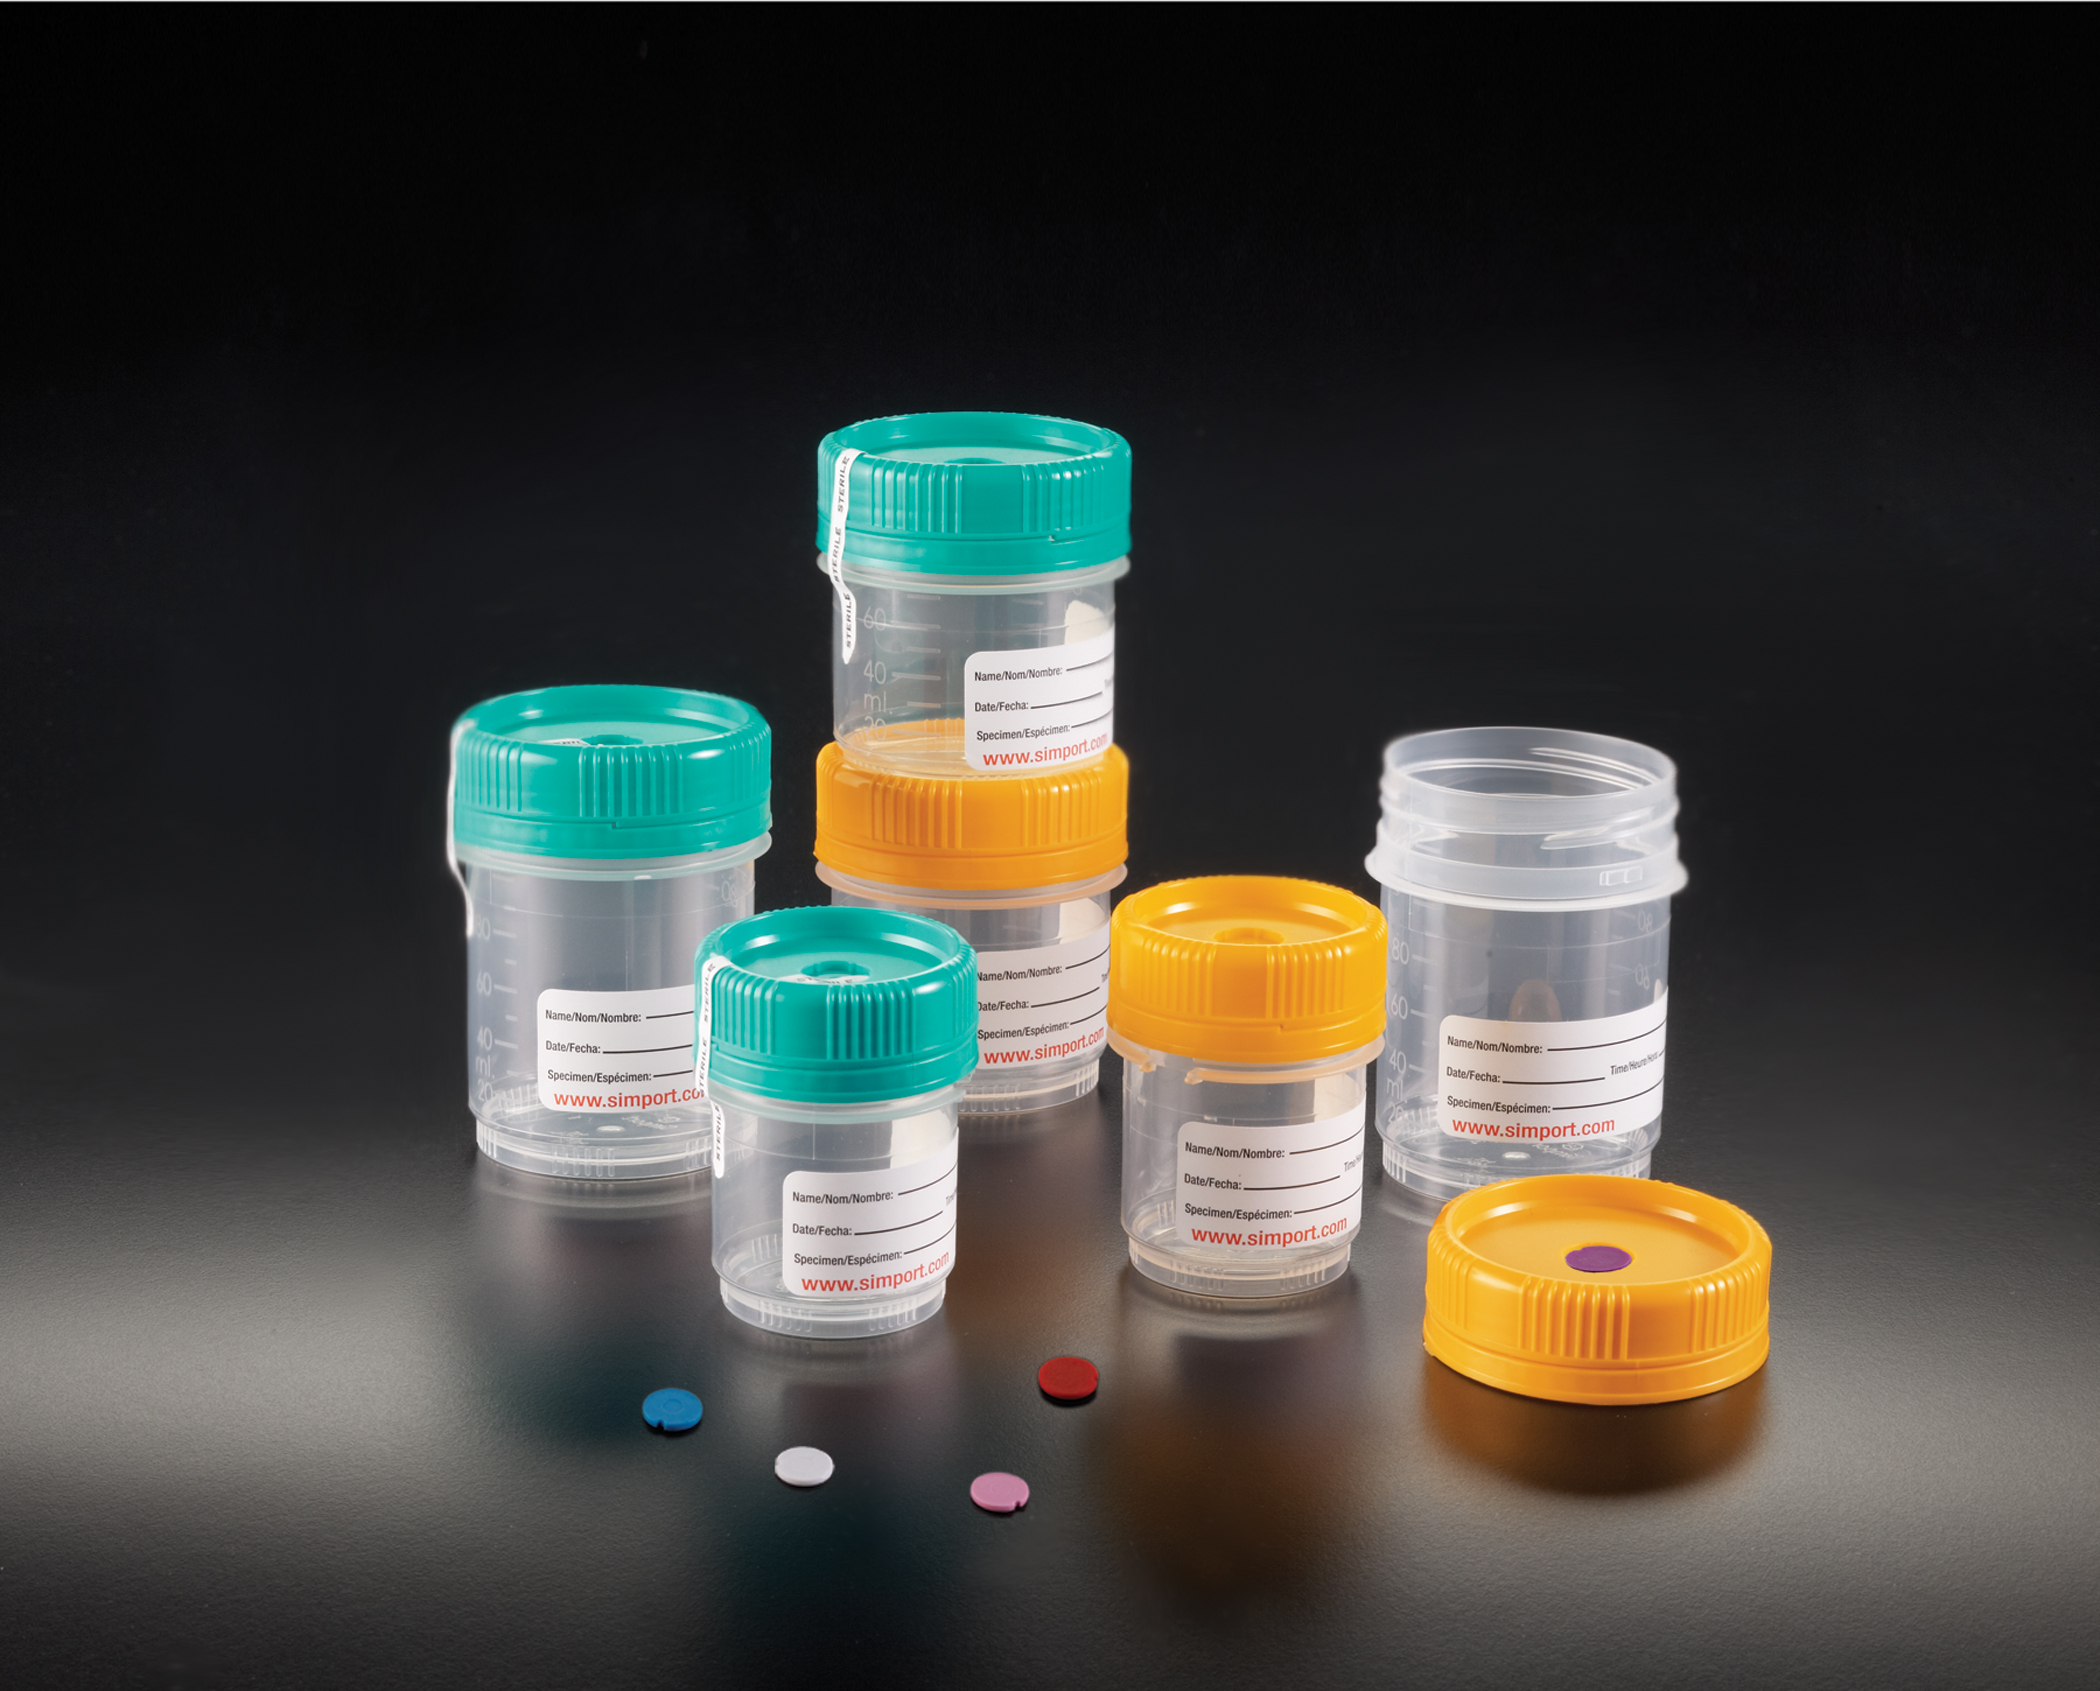 Sample Collection Containers from Environmental Express